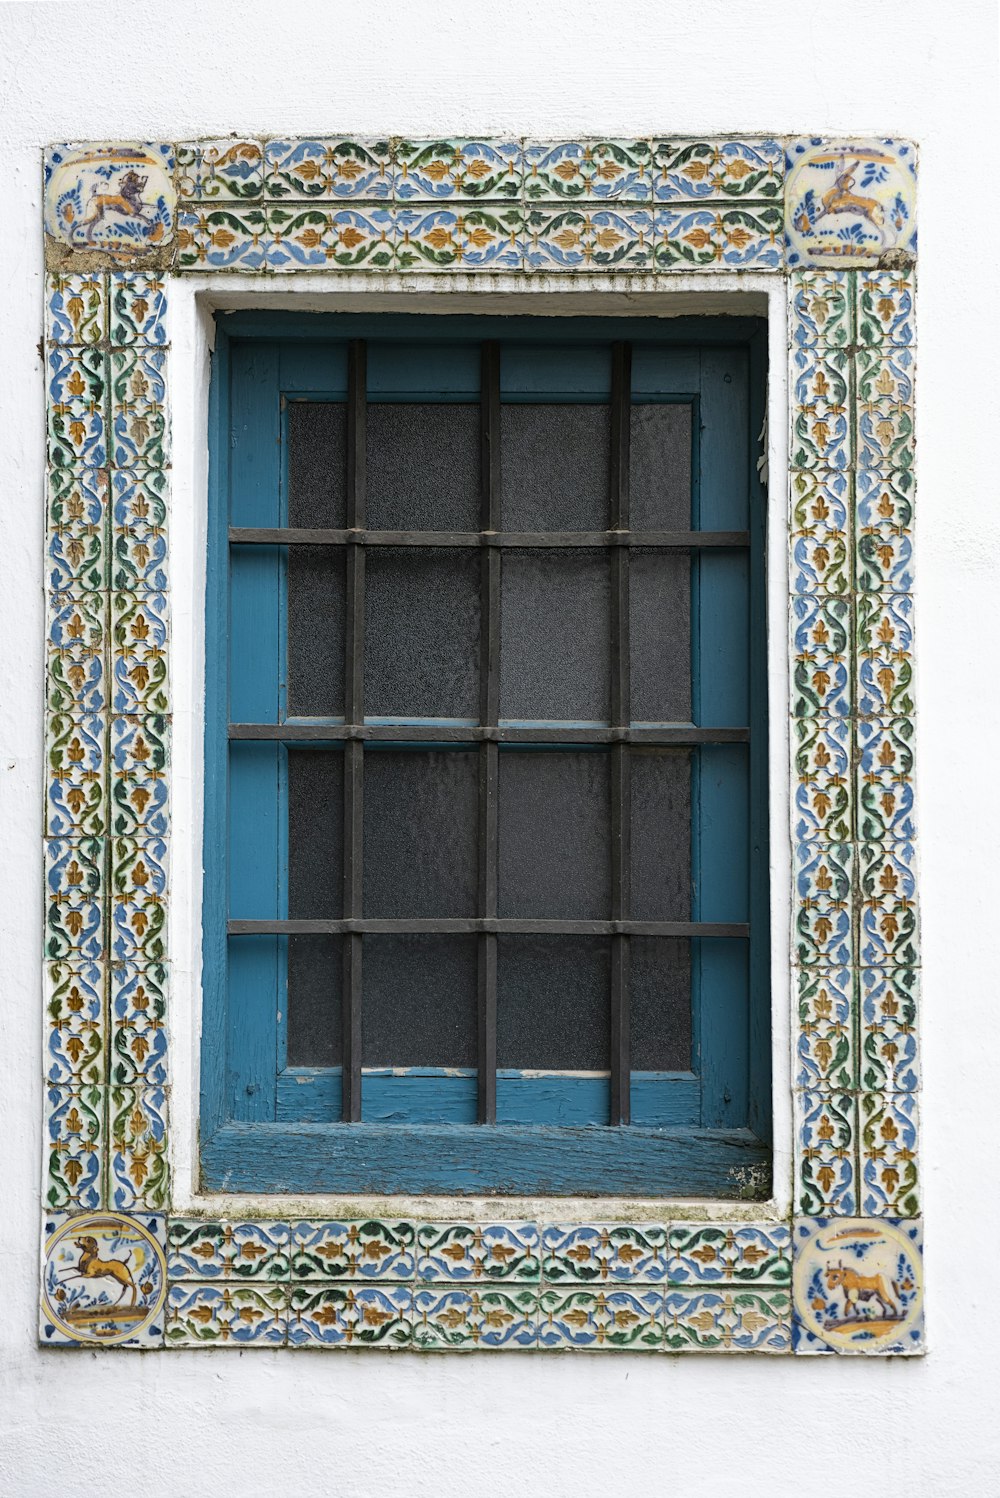 a window with a blue and green frame